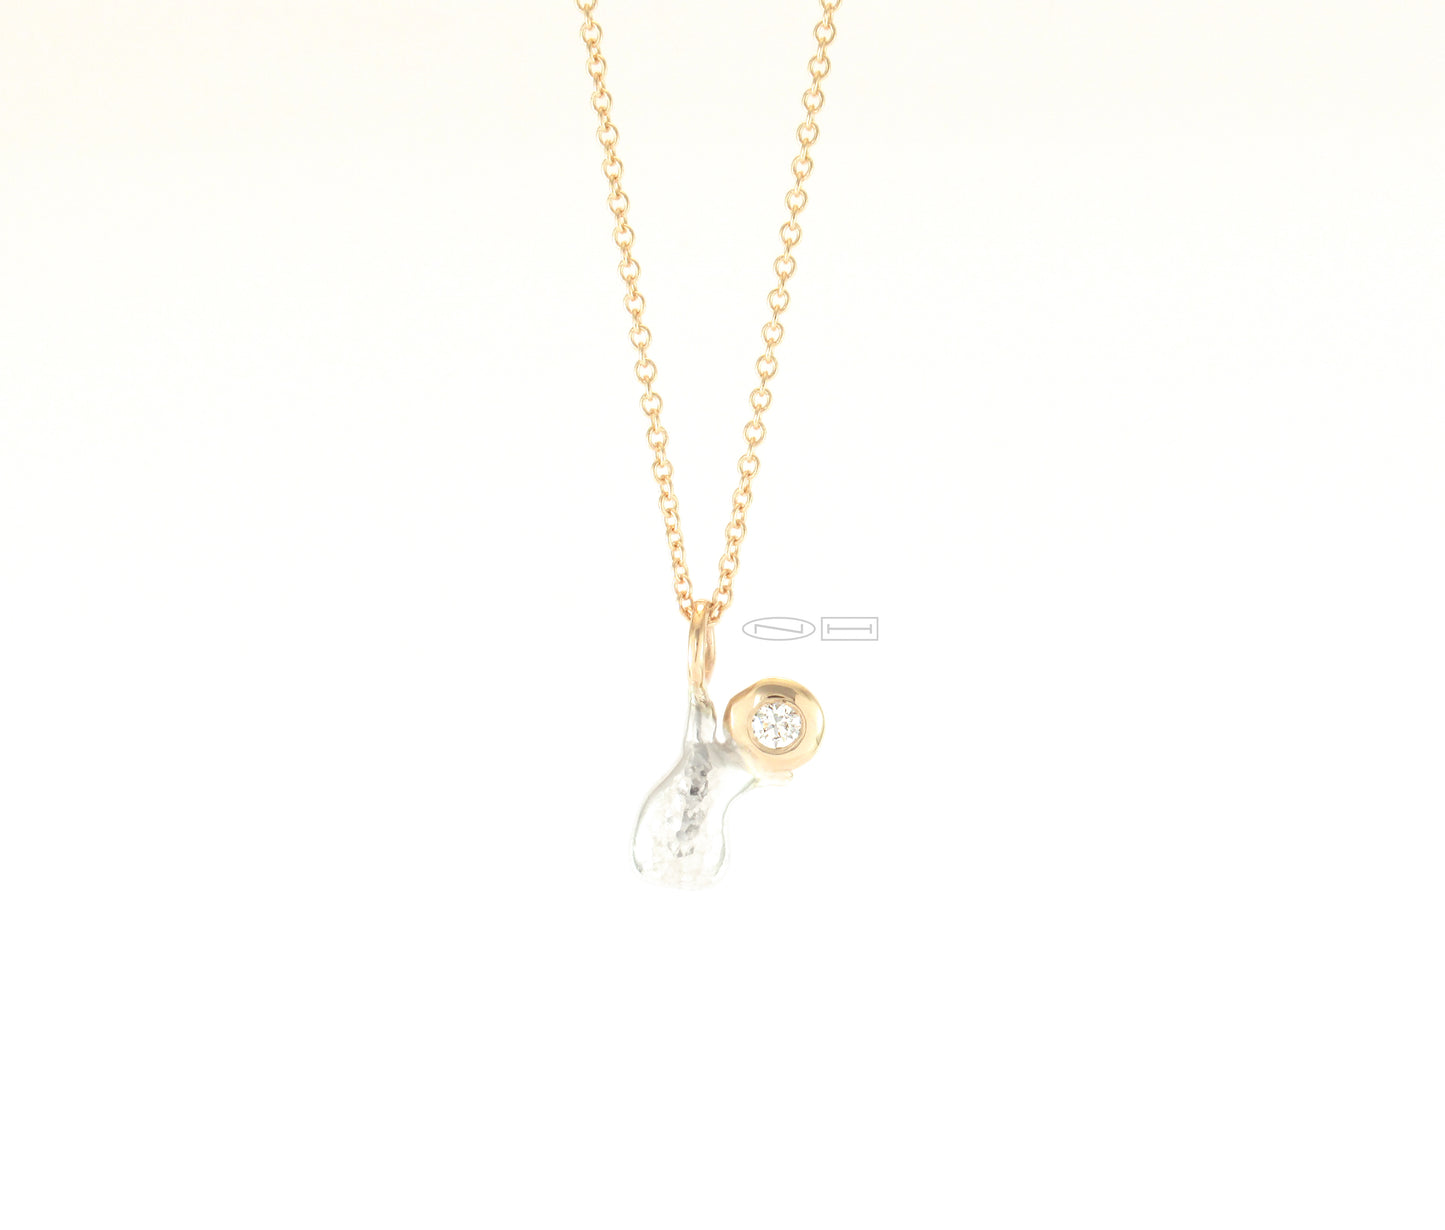 Canadian handmade by ZEALmetal in Kingston ONJoy ~ 14kt yellow gold, sterling silver, with 5pt round brilliant cut diamond. On a 14kt yellow gold 16" cable chain. Joy is a free spirit with a clear view... 